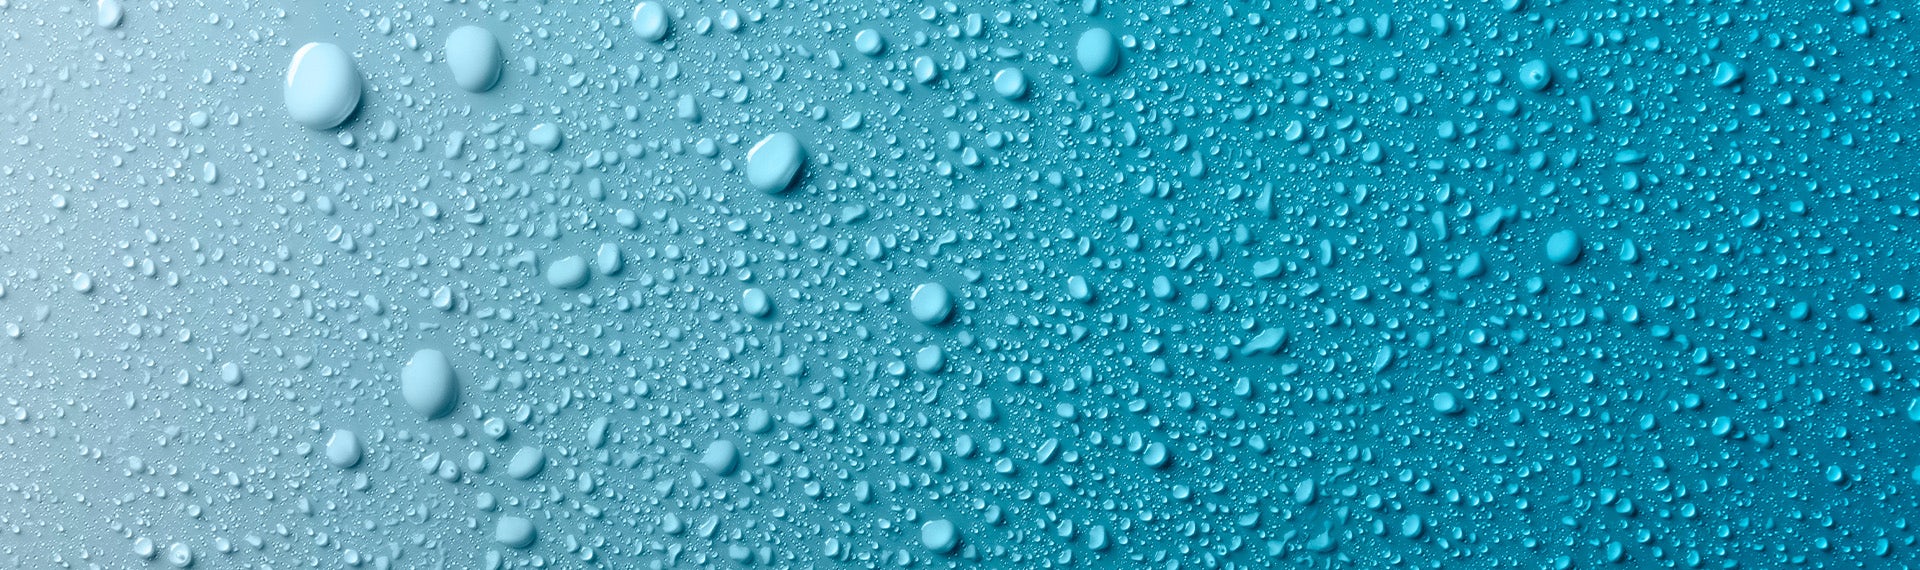 A close up of water droplets on a blue surface.